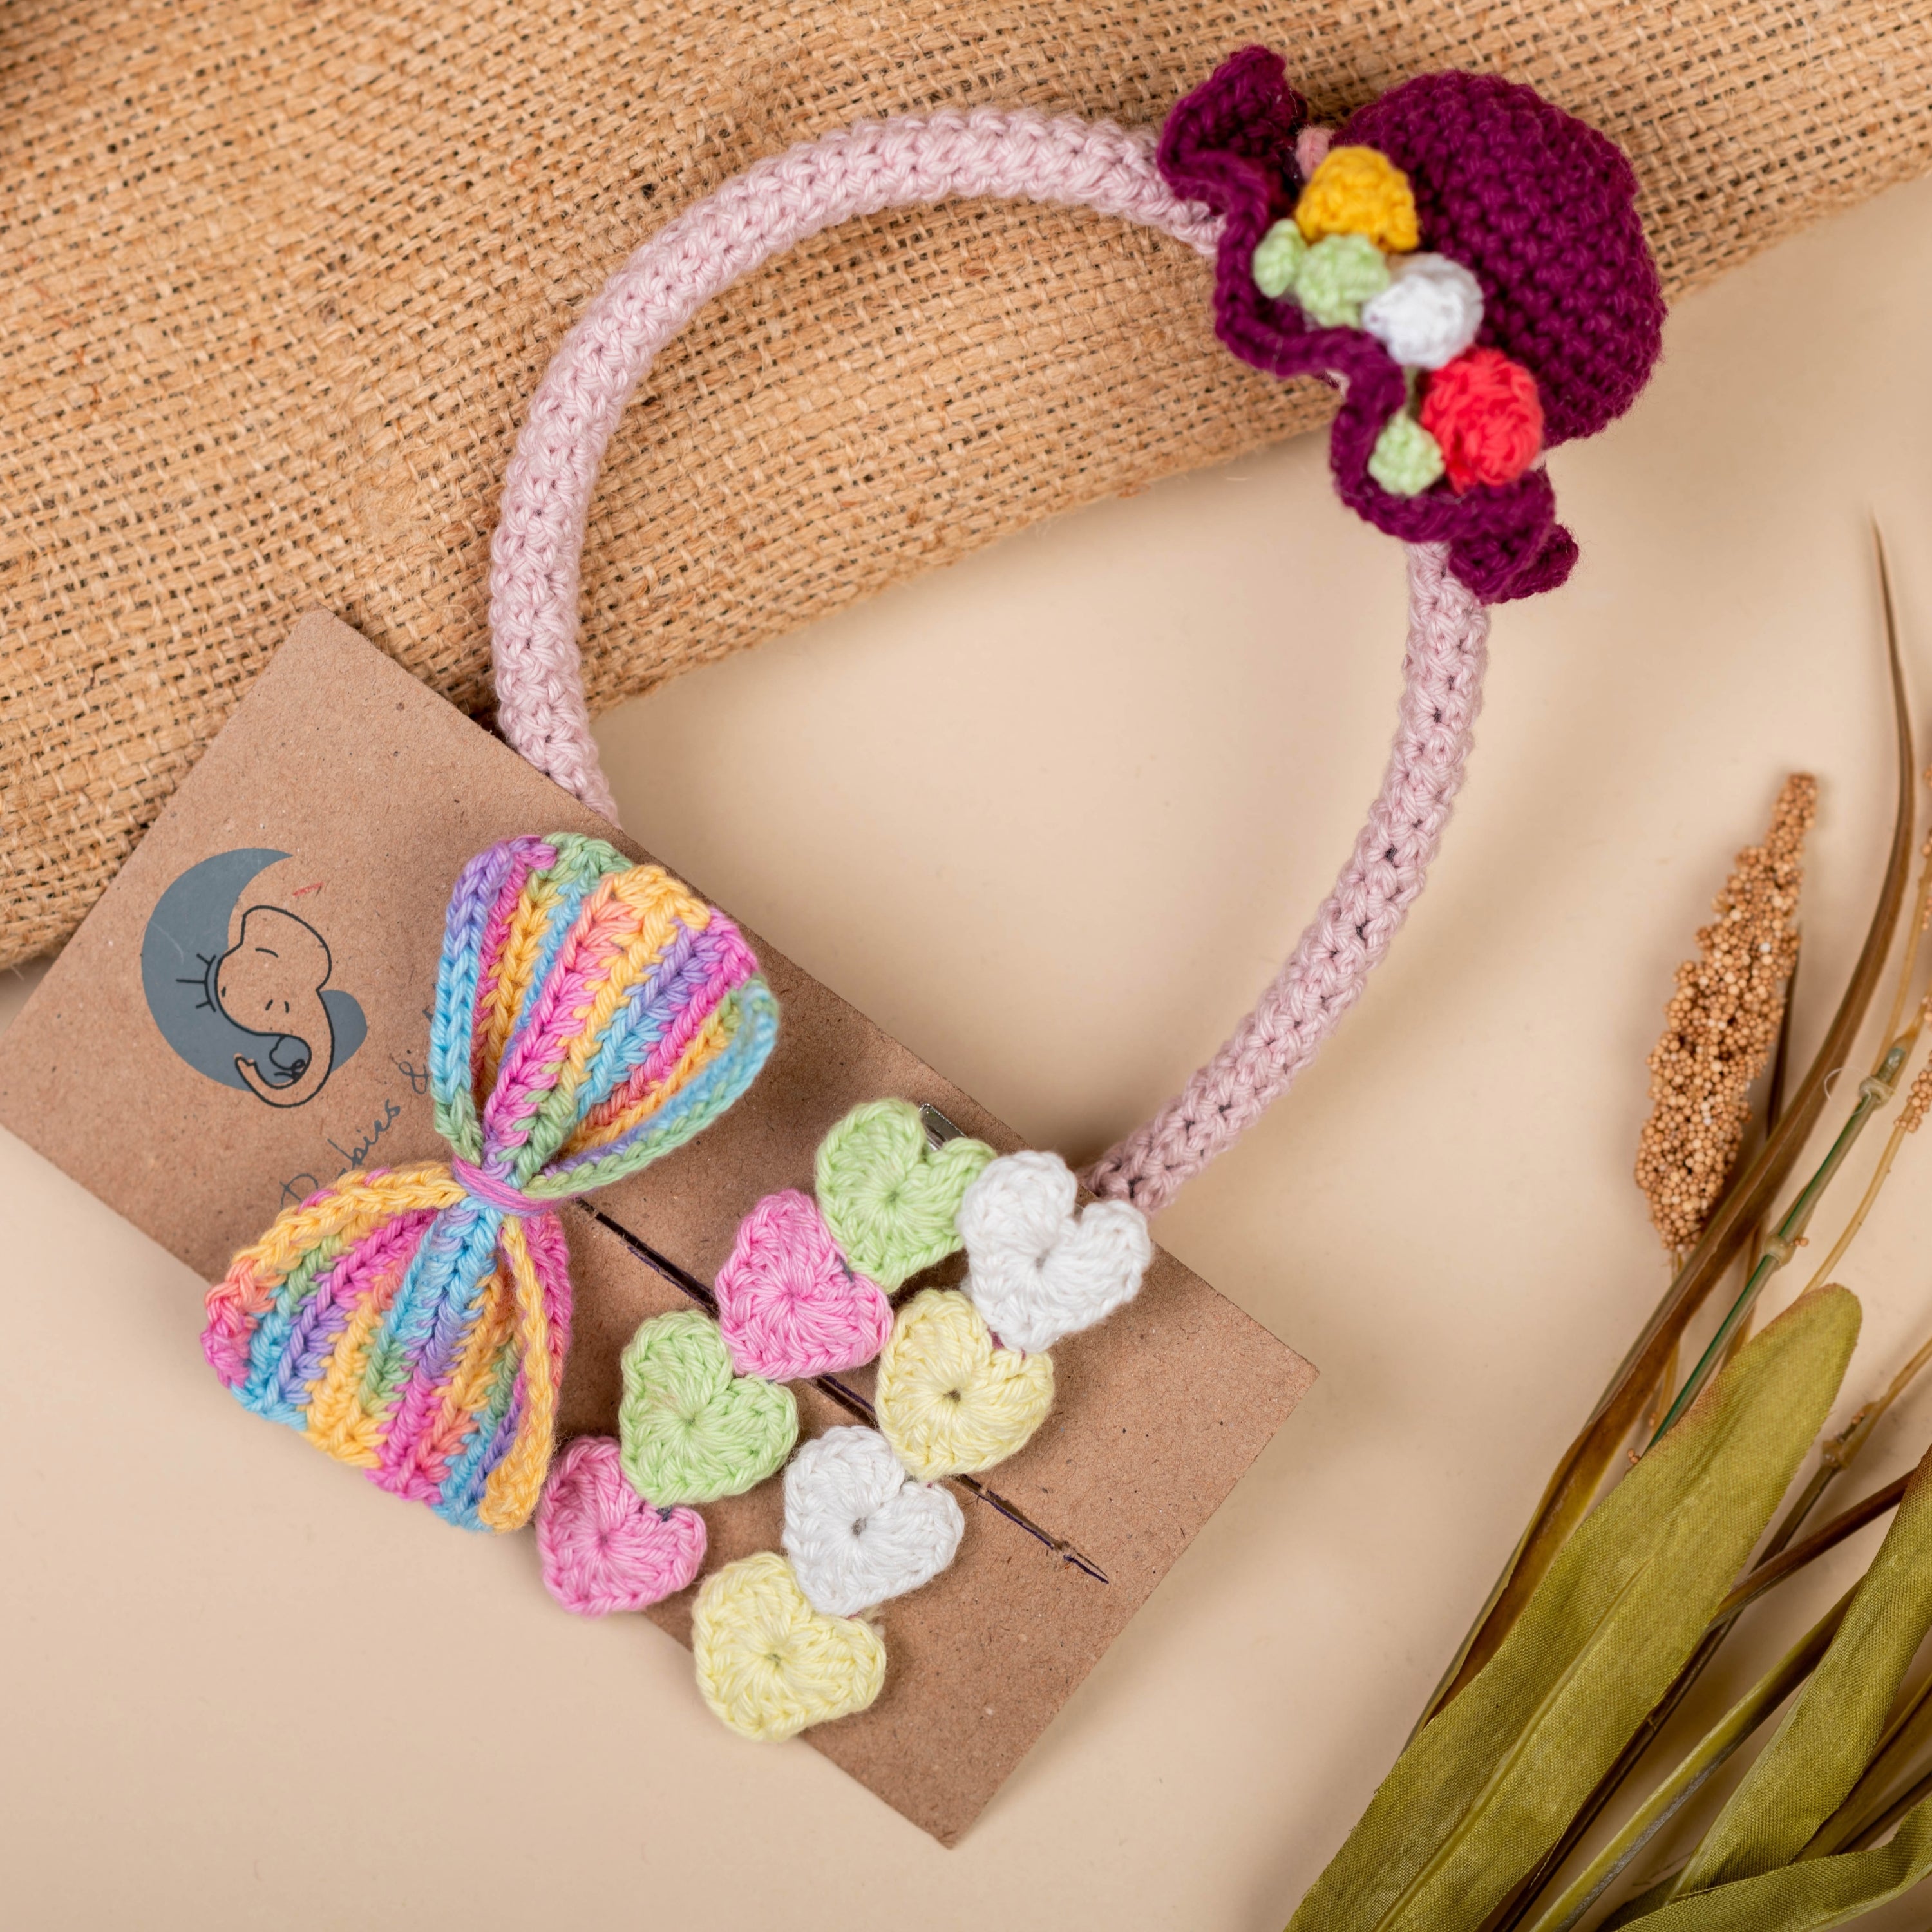 All I Have Ever Wanted - Crochet Hat  Hairband/ Multicolor Bow/ Heart  Alligator Clip - Gift Set